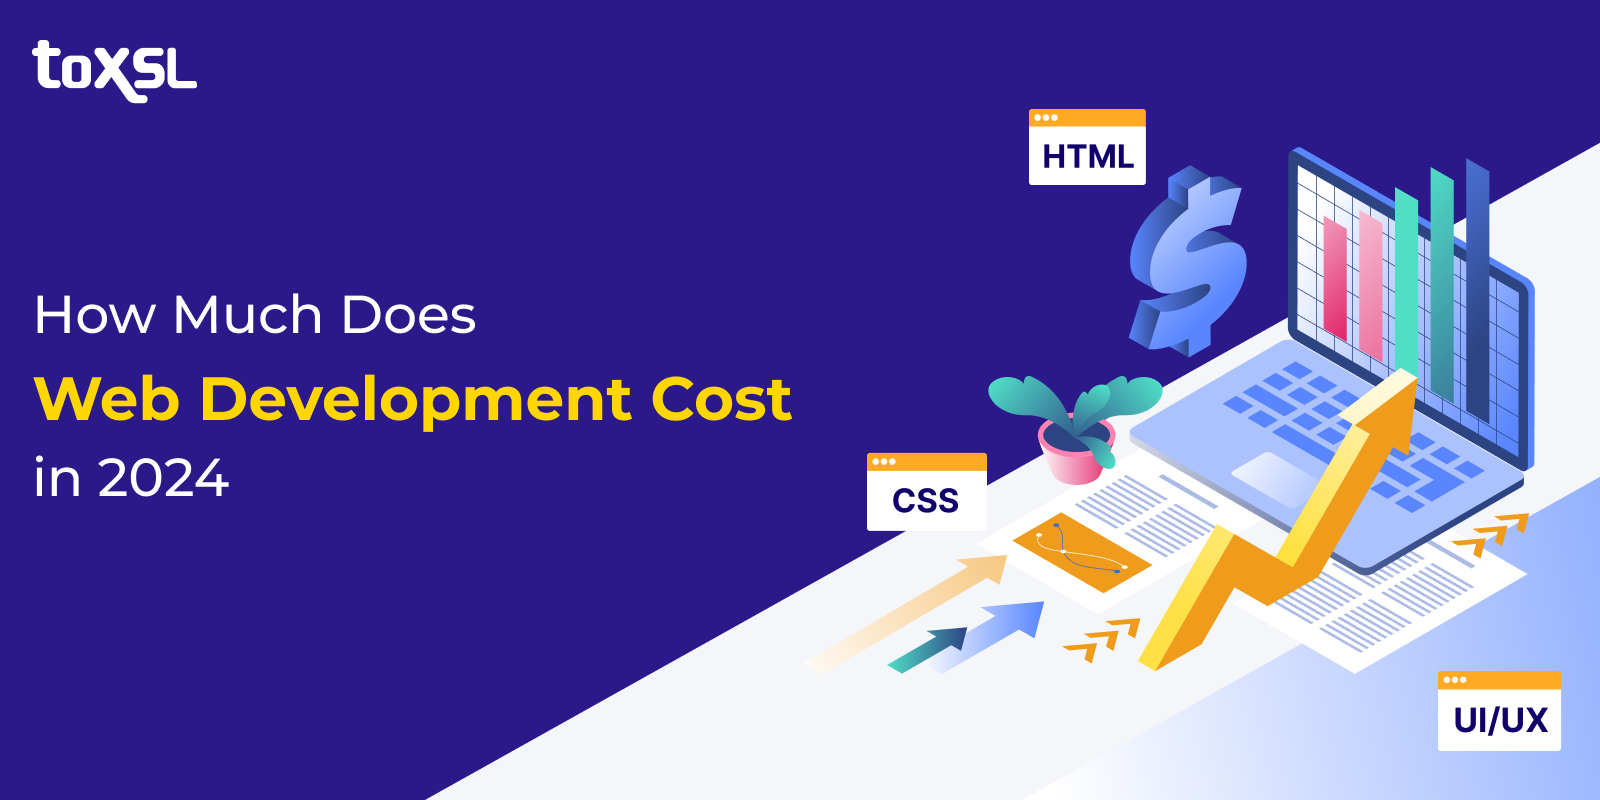 How Much Does Web Development Cost in 2024